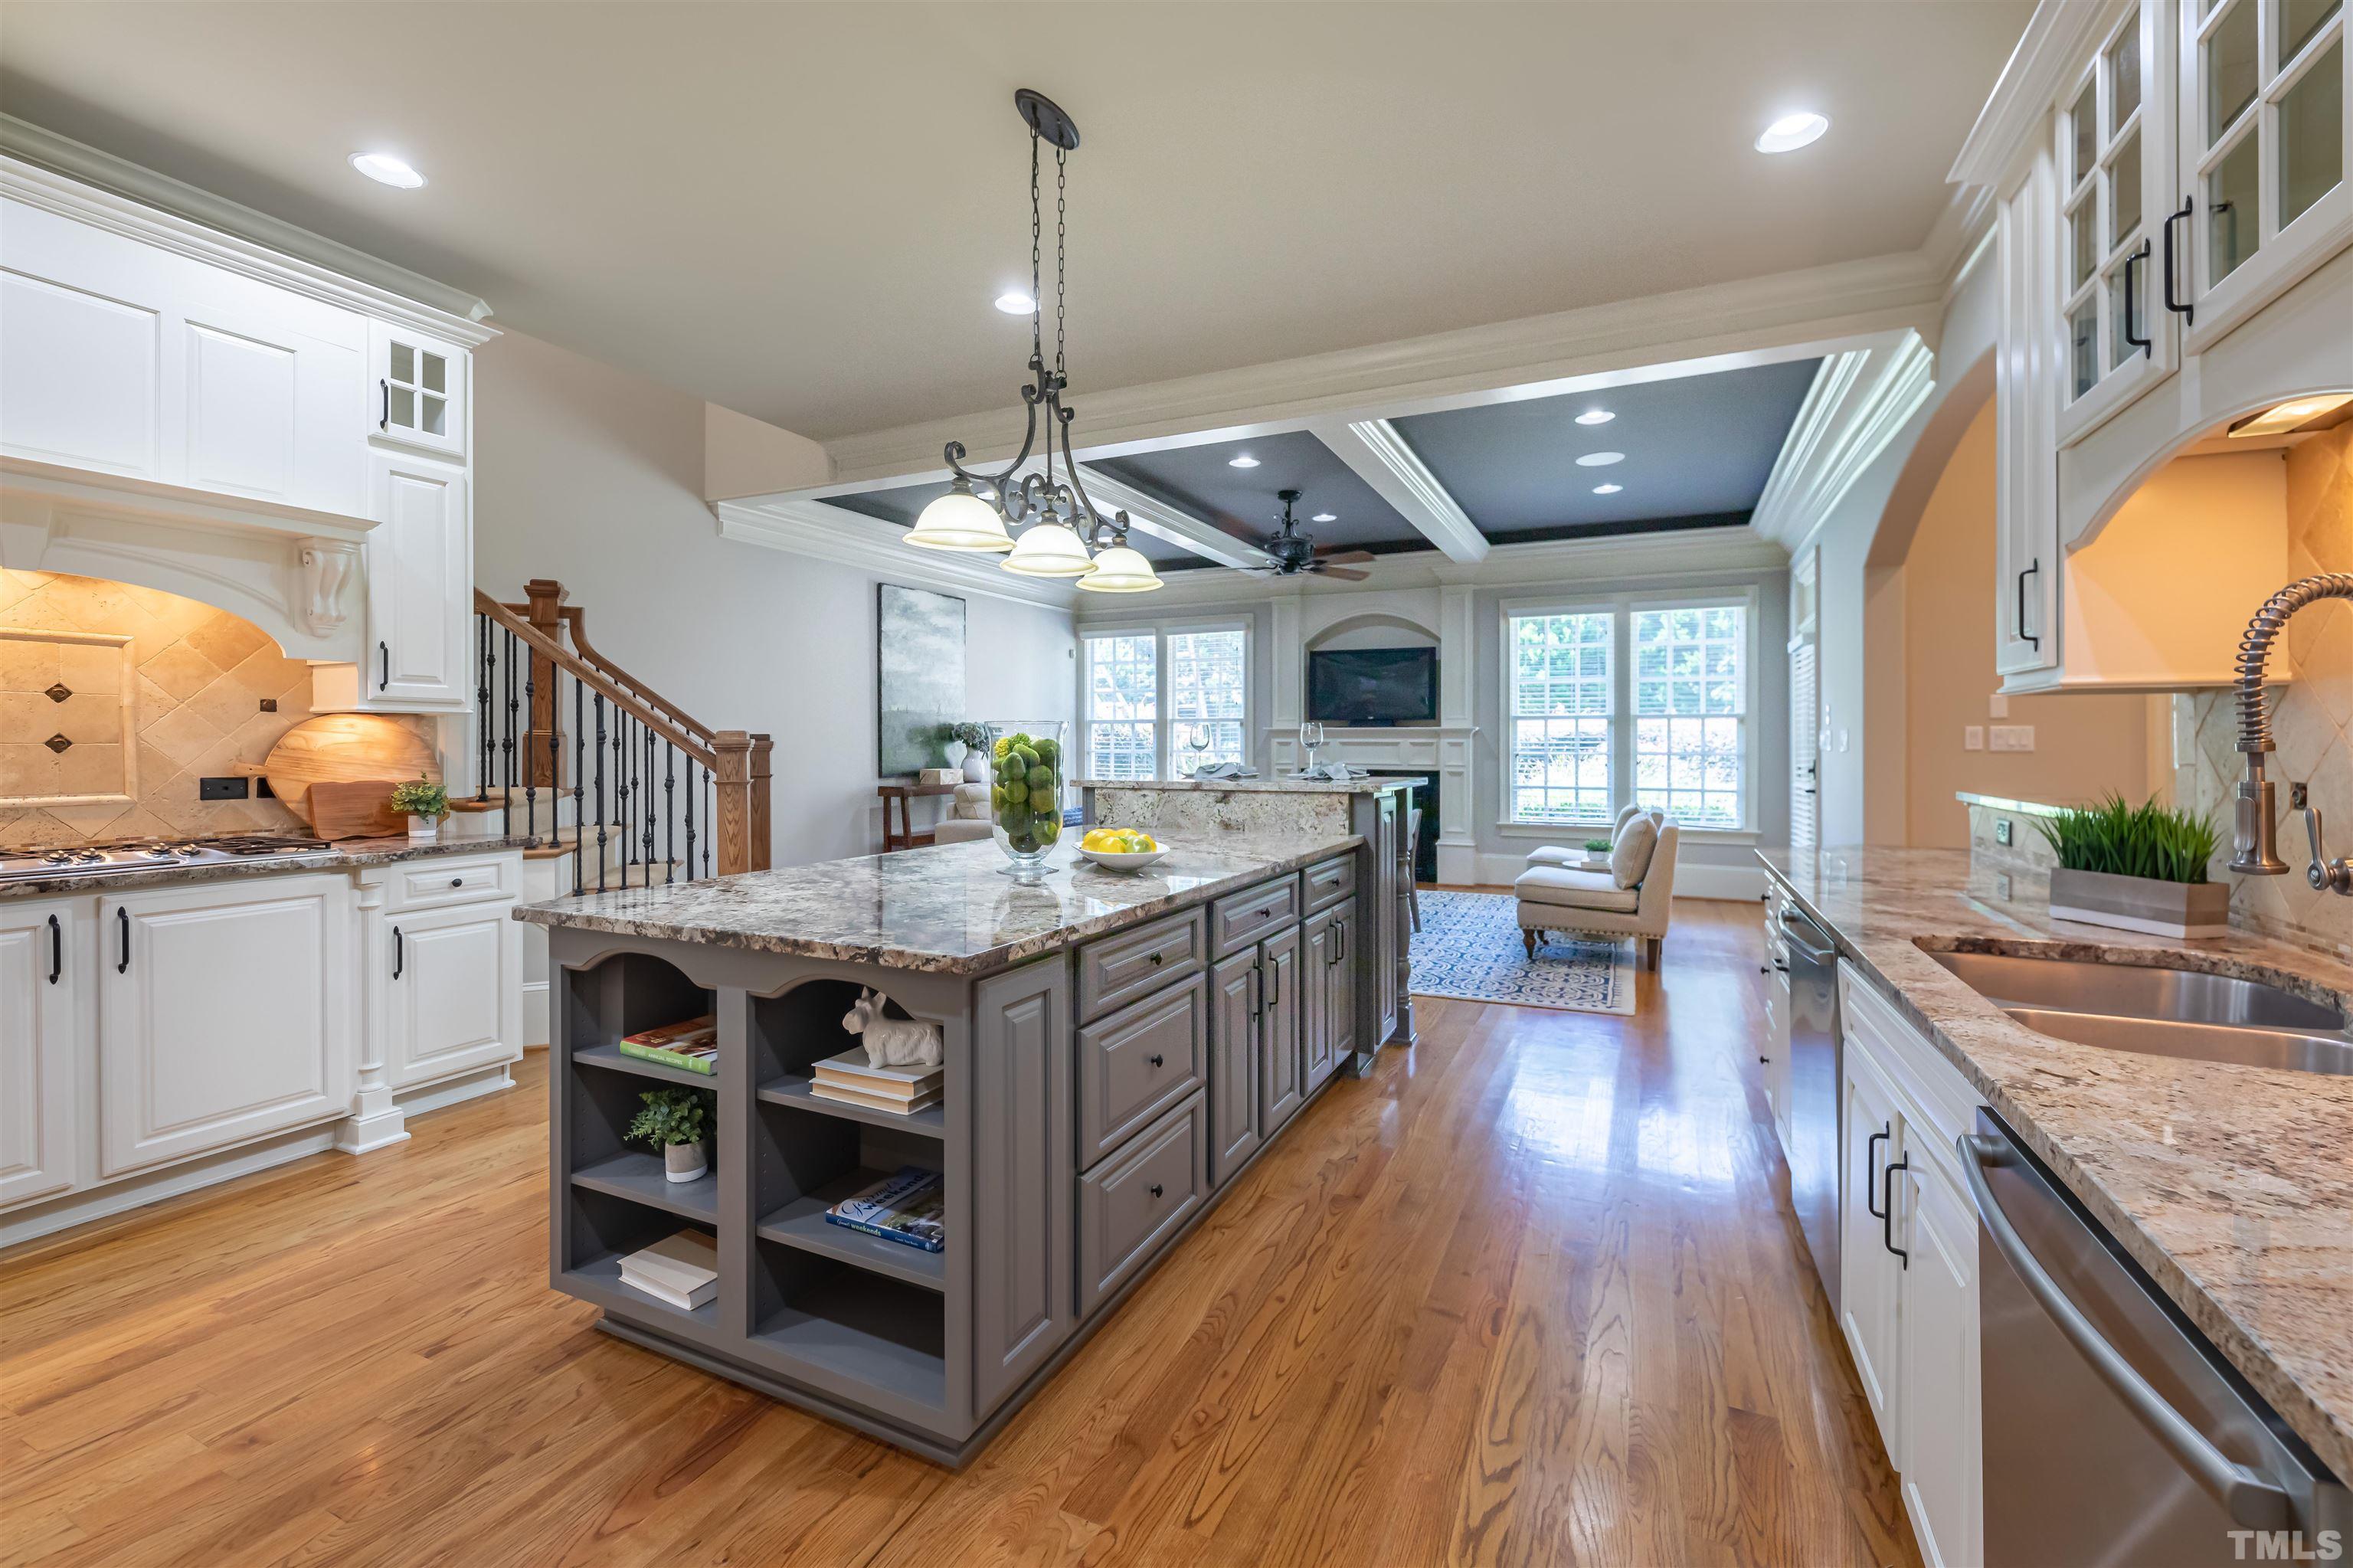 The gourmet kitchen is a cook's delight with professional style Thermador appliances including a six burner gas cook top with down draft, built in oven, microwave & warming drawer, fridge.  There are 2 dishwashers.